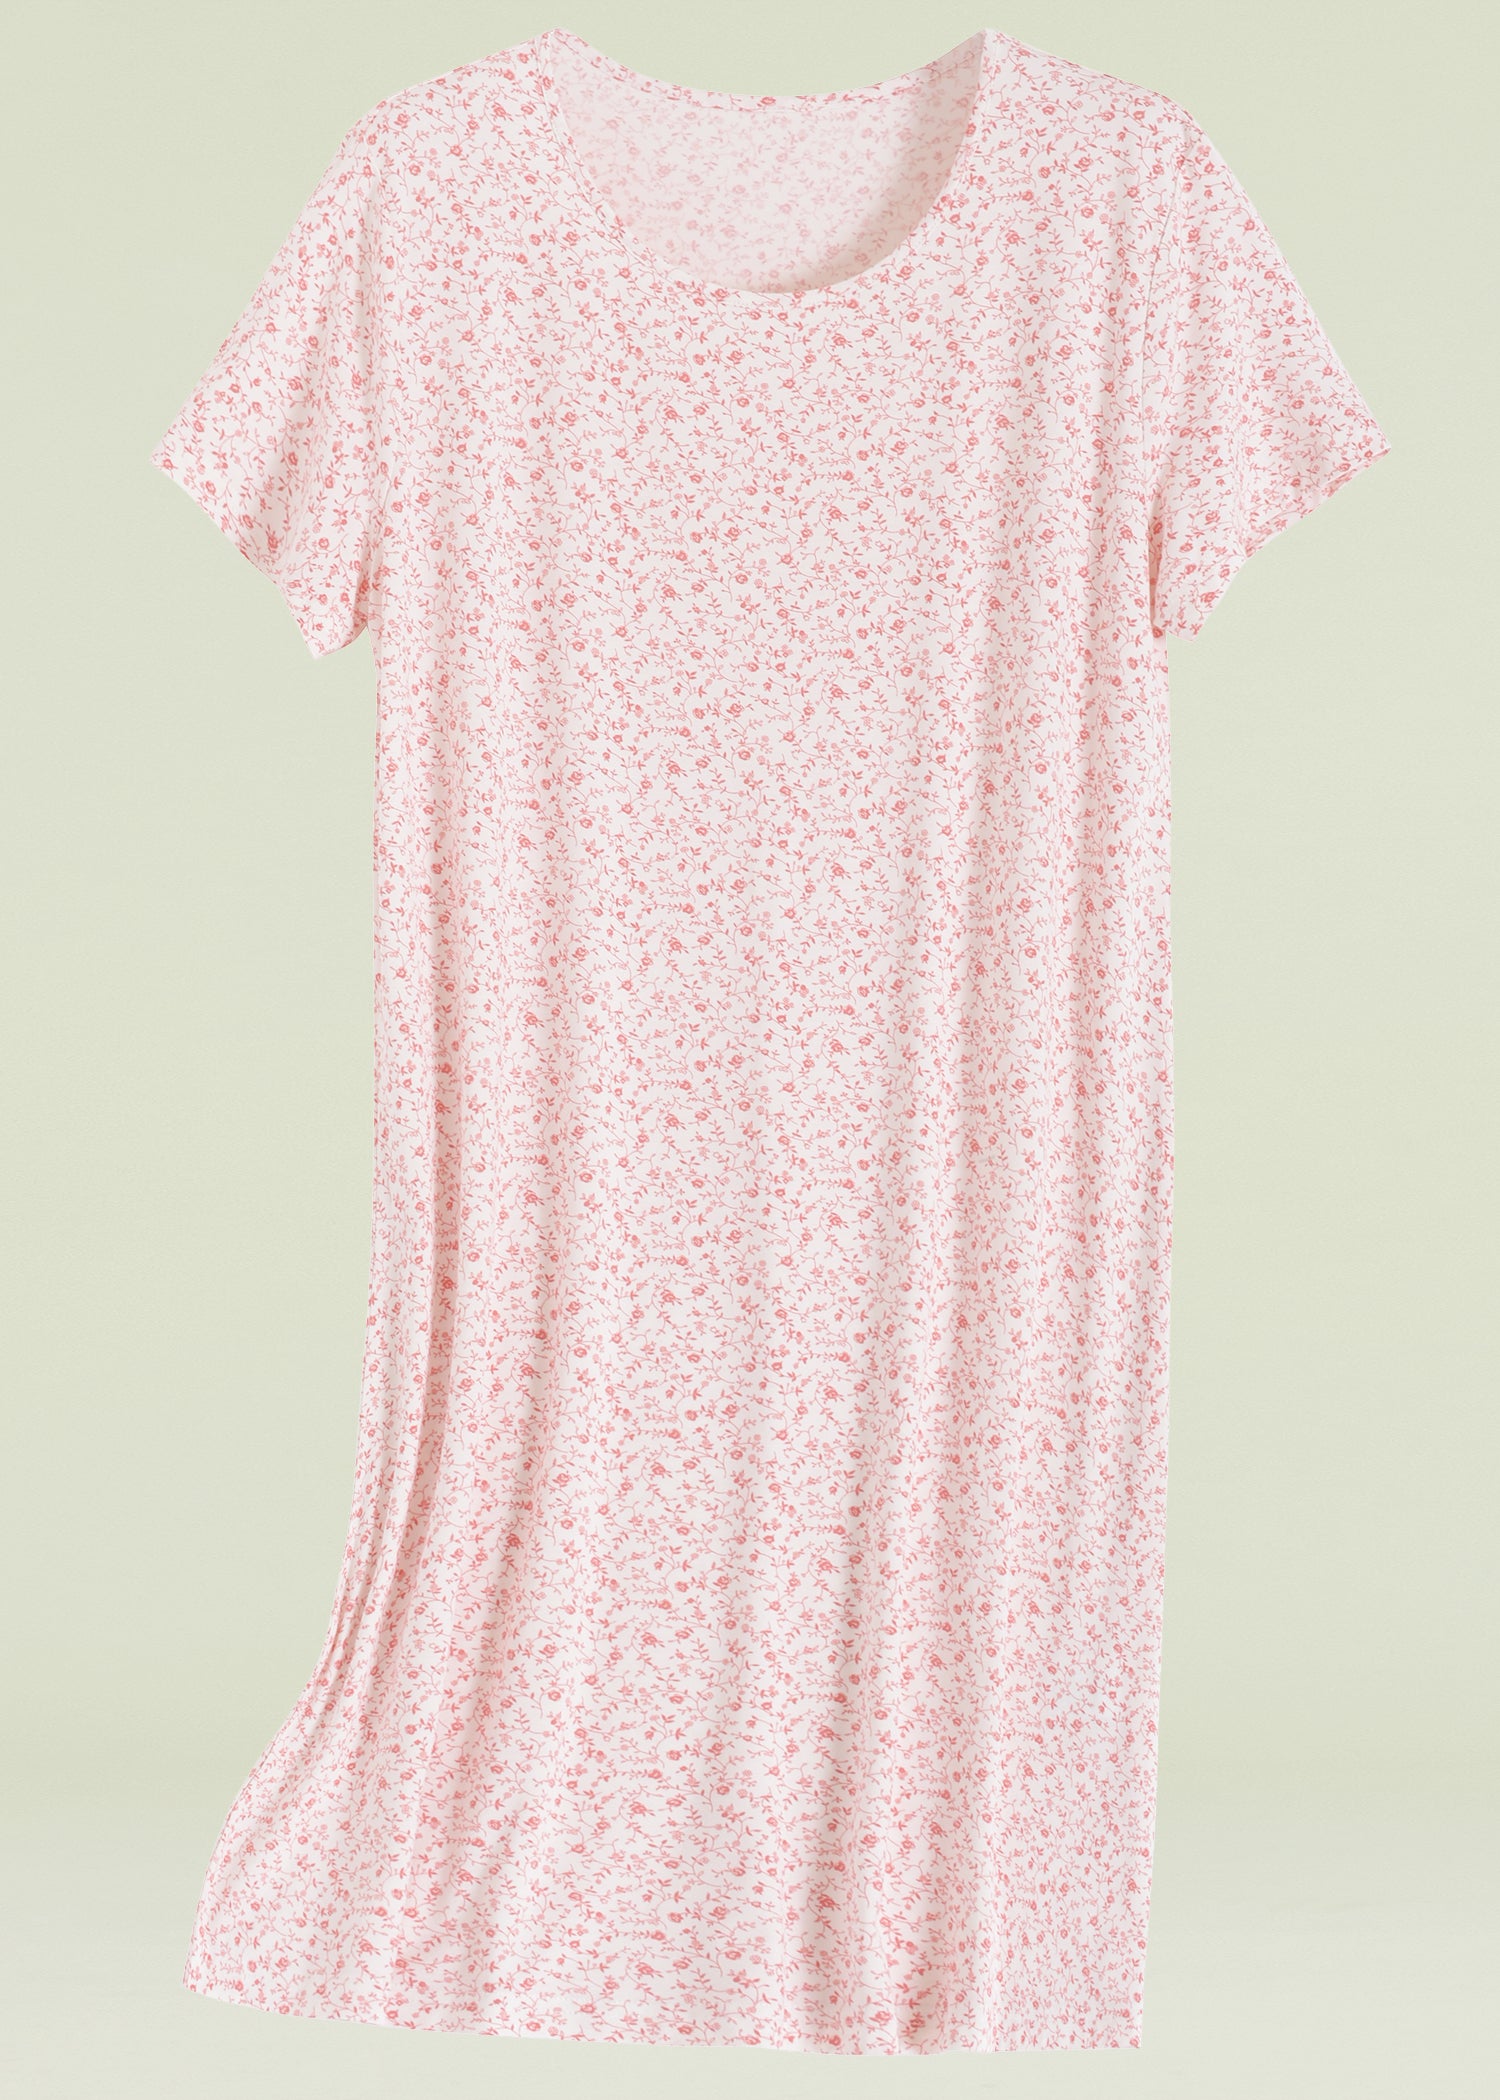 RIZA by TRYLO - Loosen up in style with our 100% cotton women's nightwear.  Its hand-picked gorgeous prints are ideal for your day-to-night look. ✓  Available in M, L, XL, 2XL and